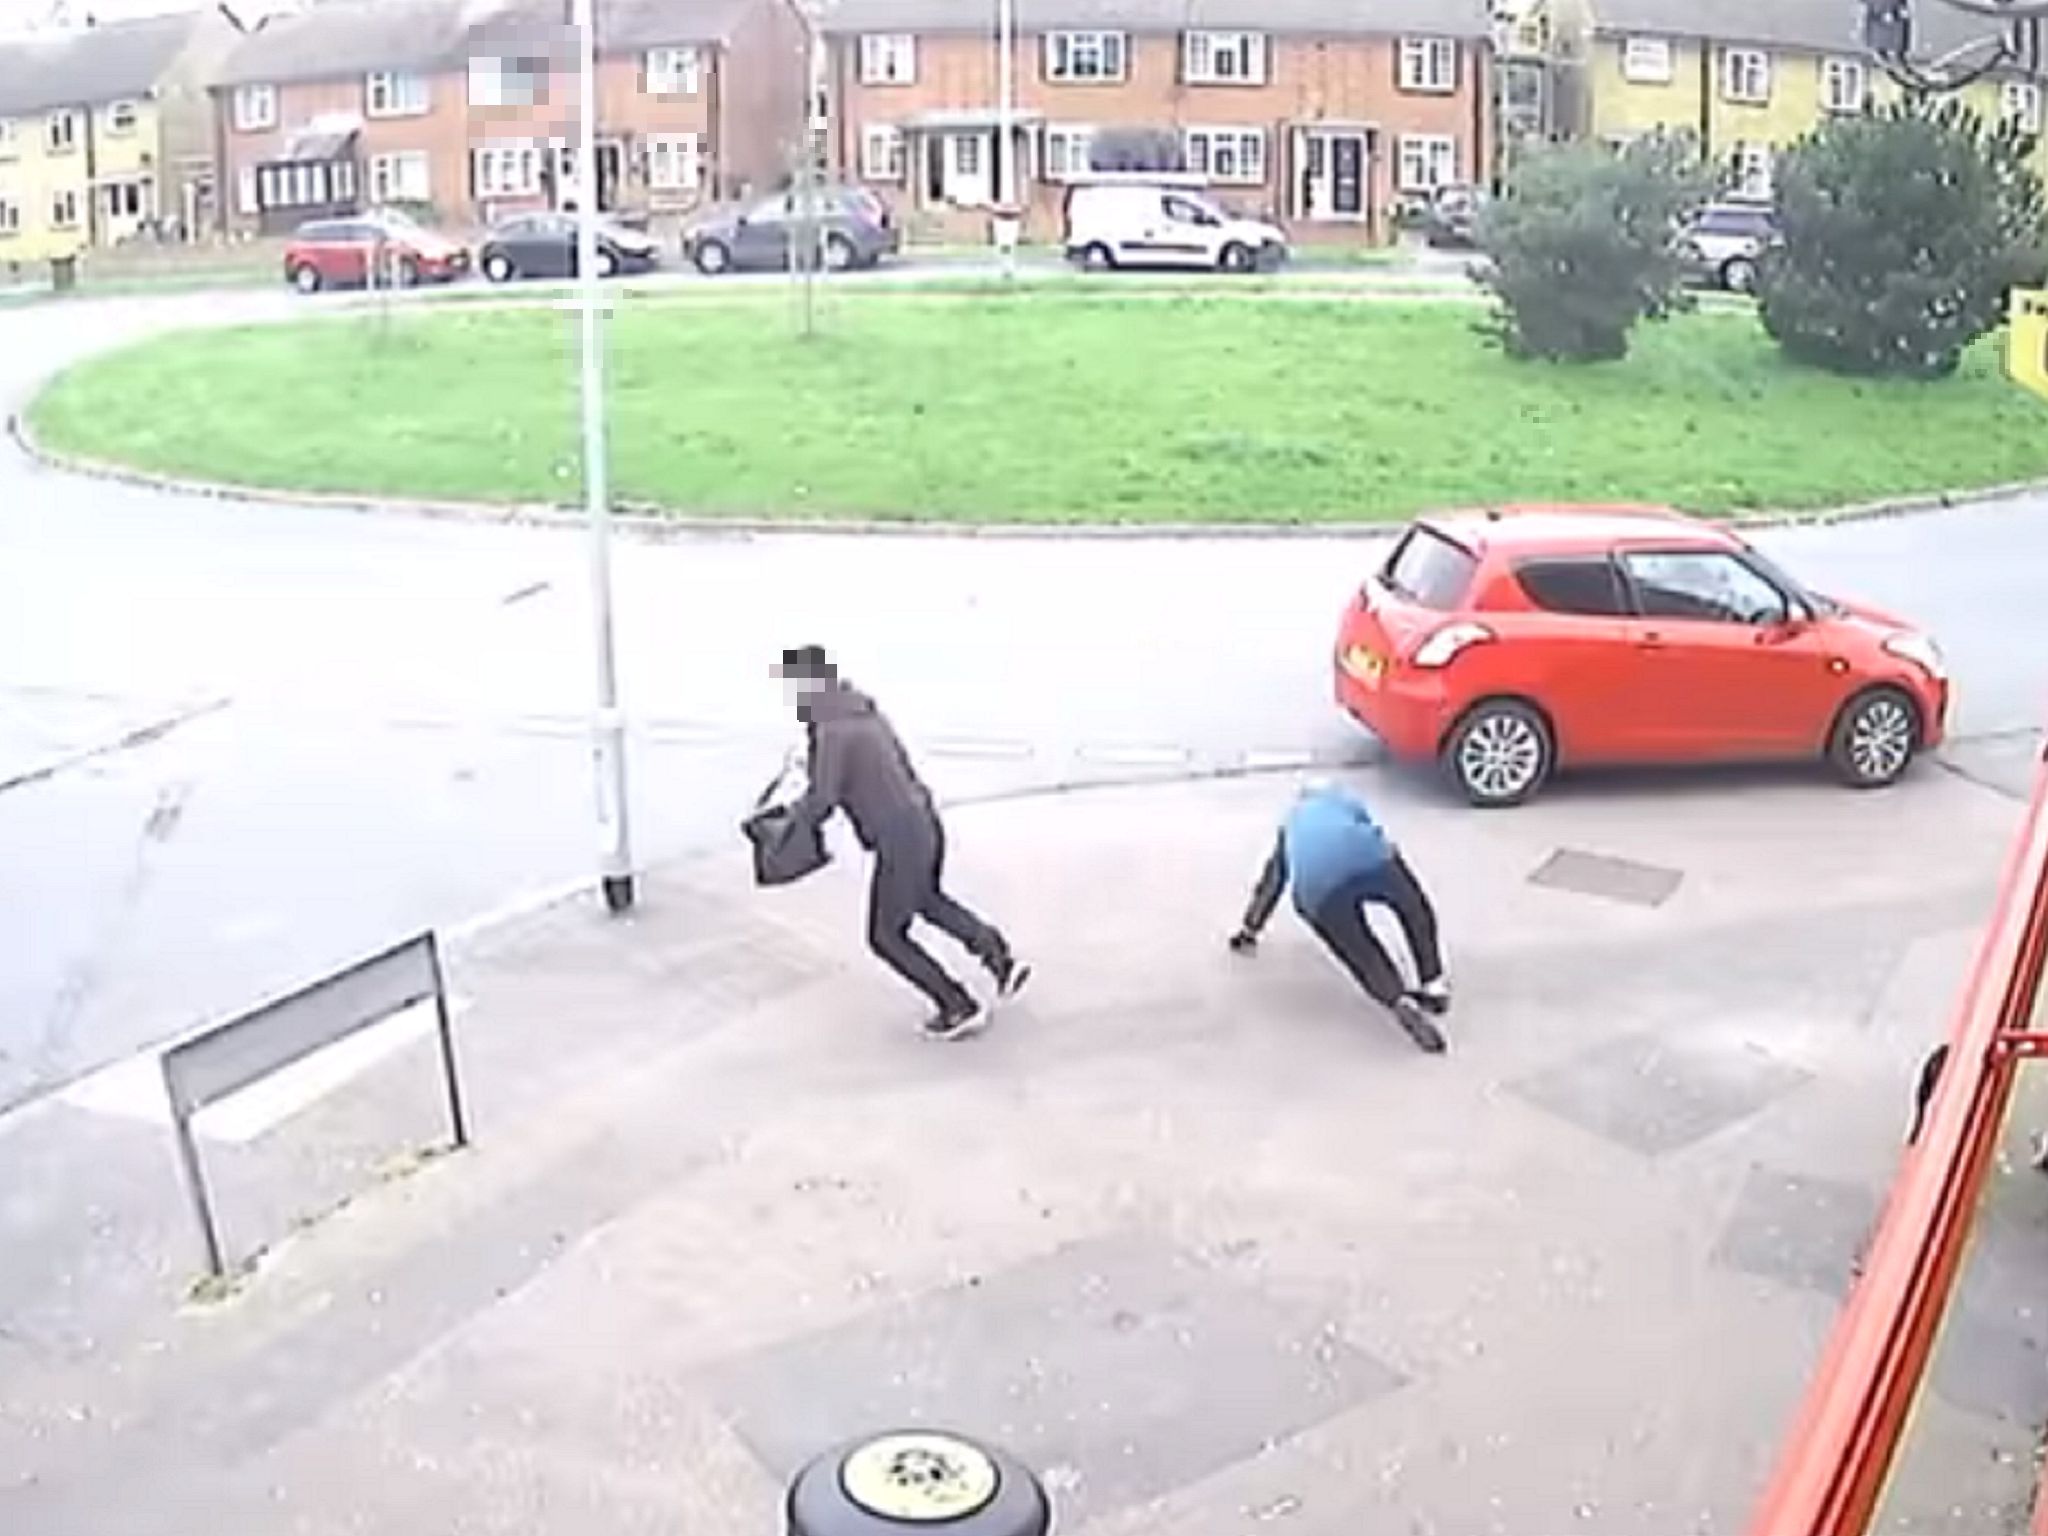 Screen grab from video showing man mugging woman in her 80s in Sittingbourne, Kent, 14 April 2020.